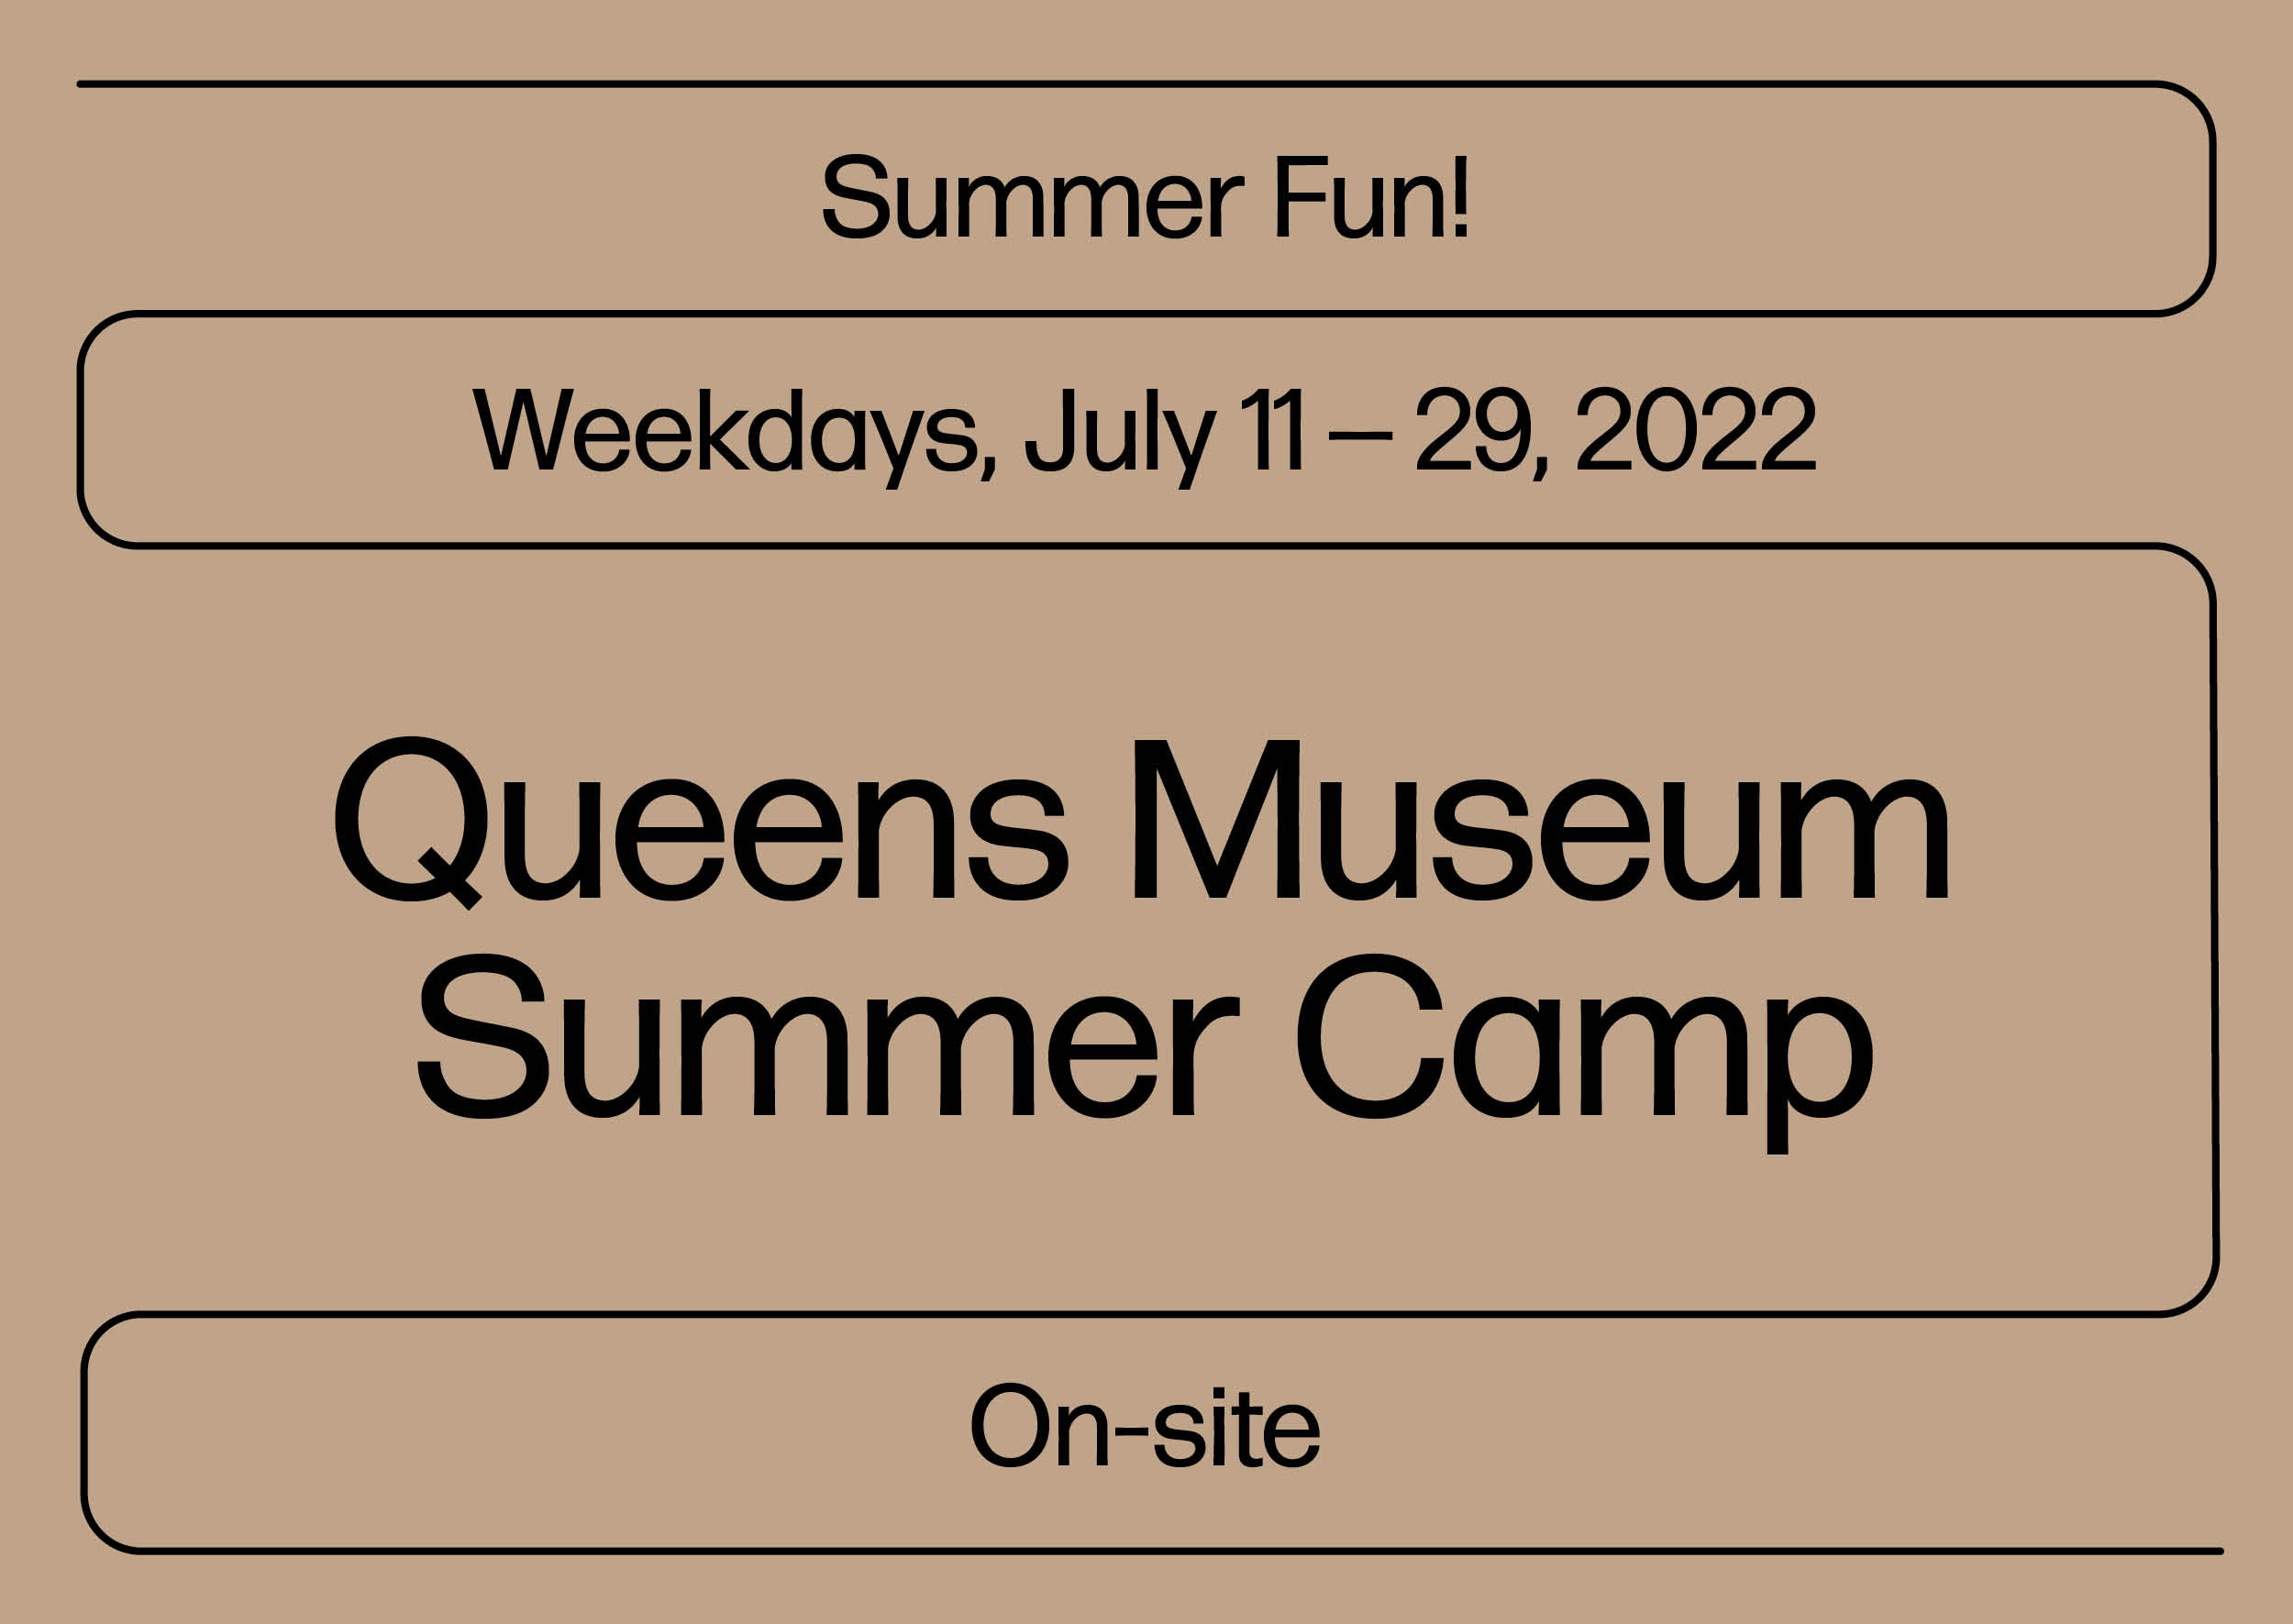 Black text on beige background that reads " Summer Fun! Weekdays, July 11-29, 2022, Queens Museum Summer Camp, On-site"